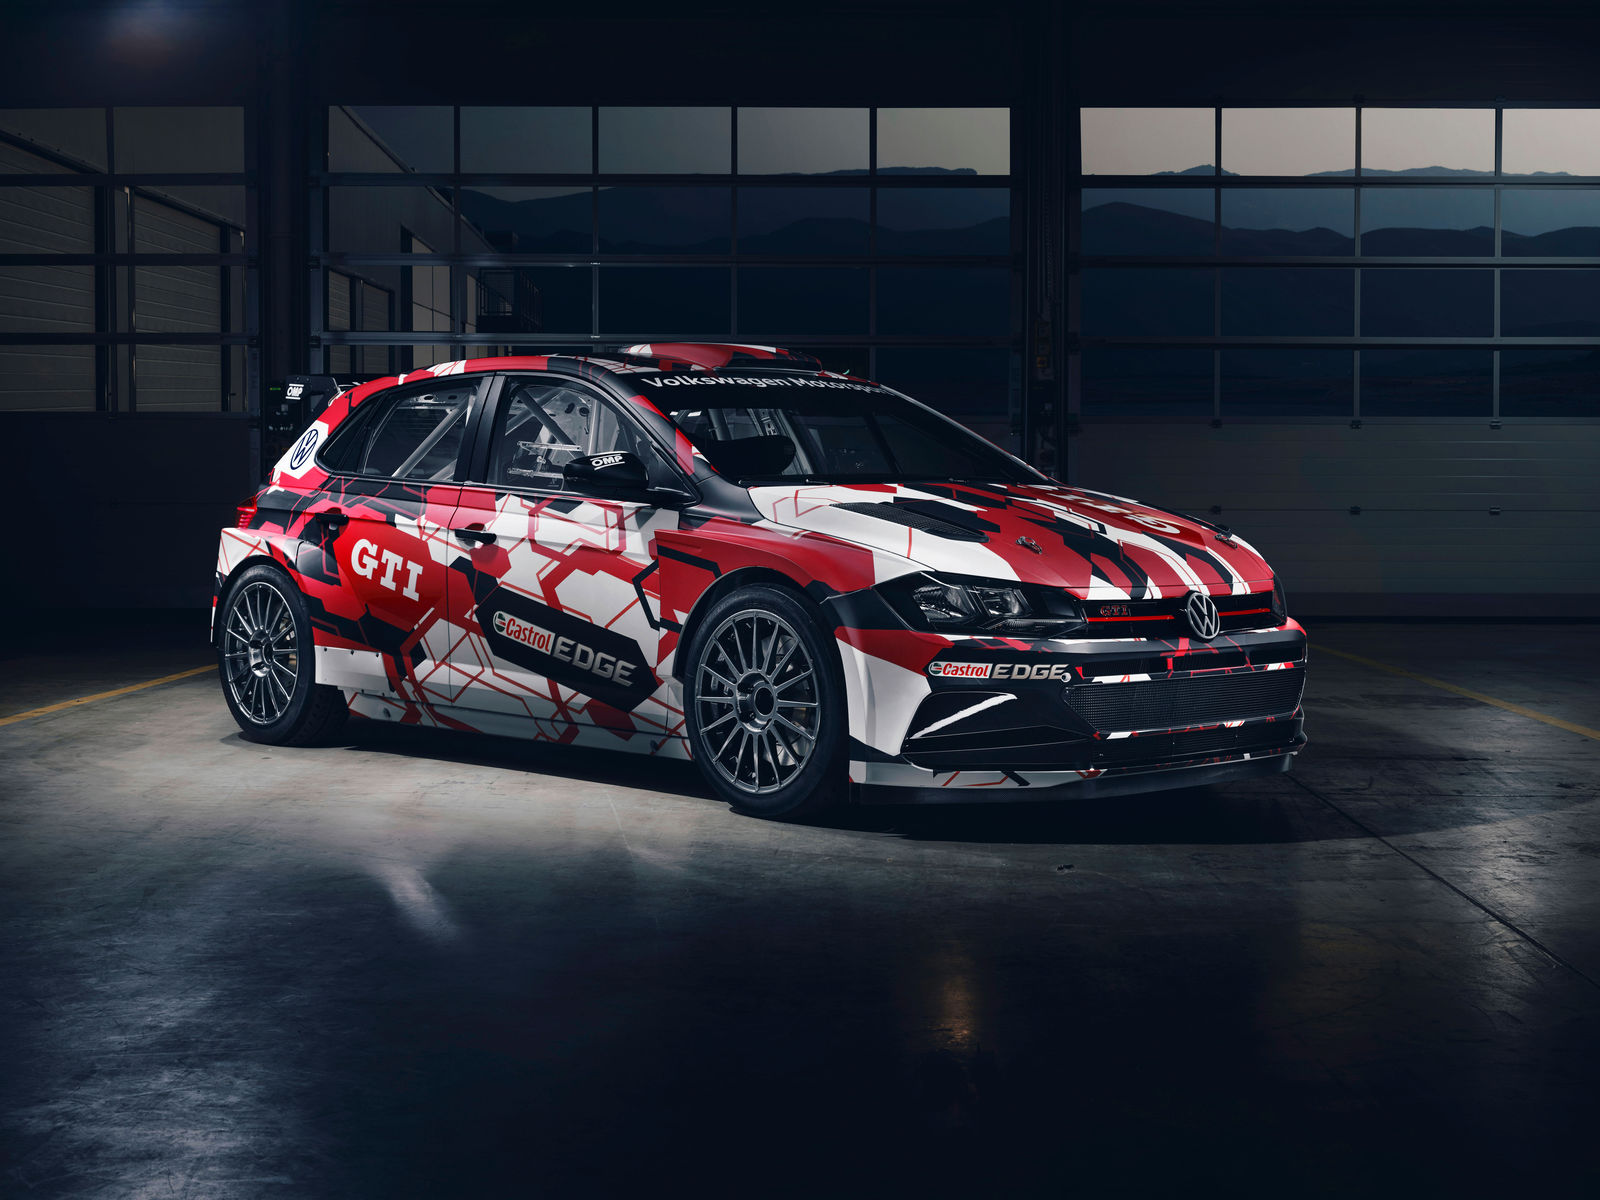 The new Polo GTI R5